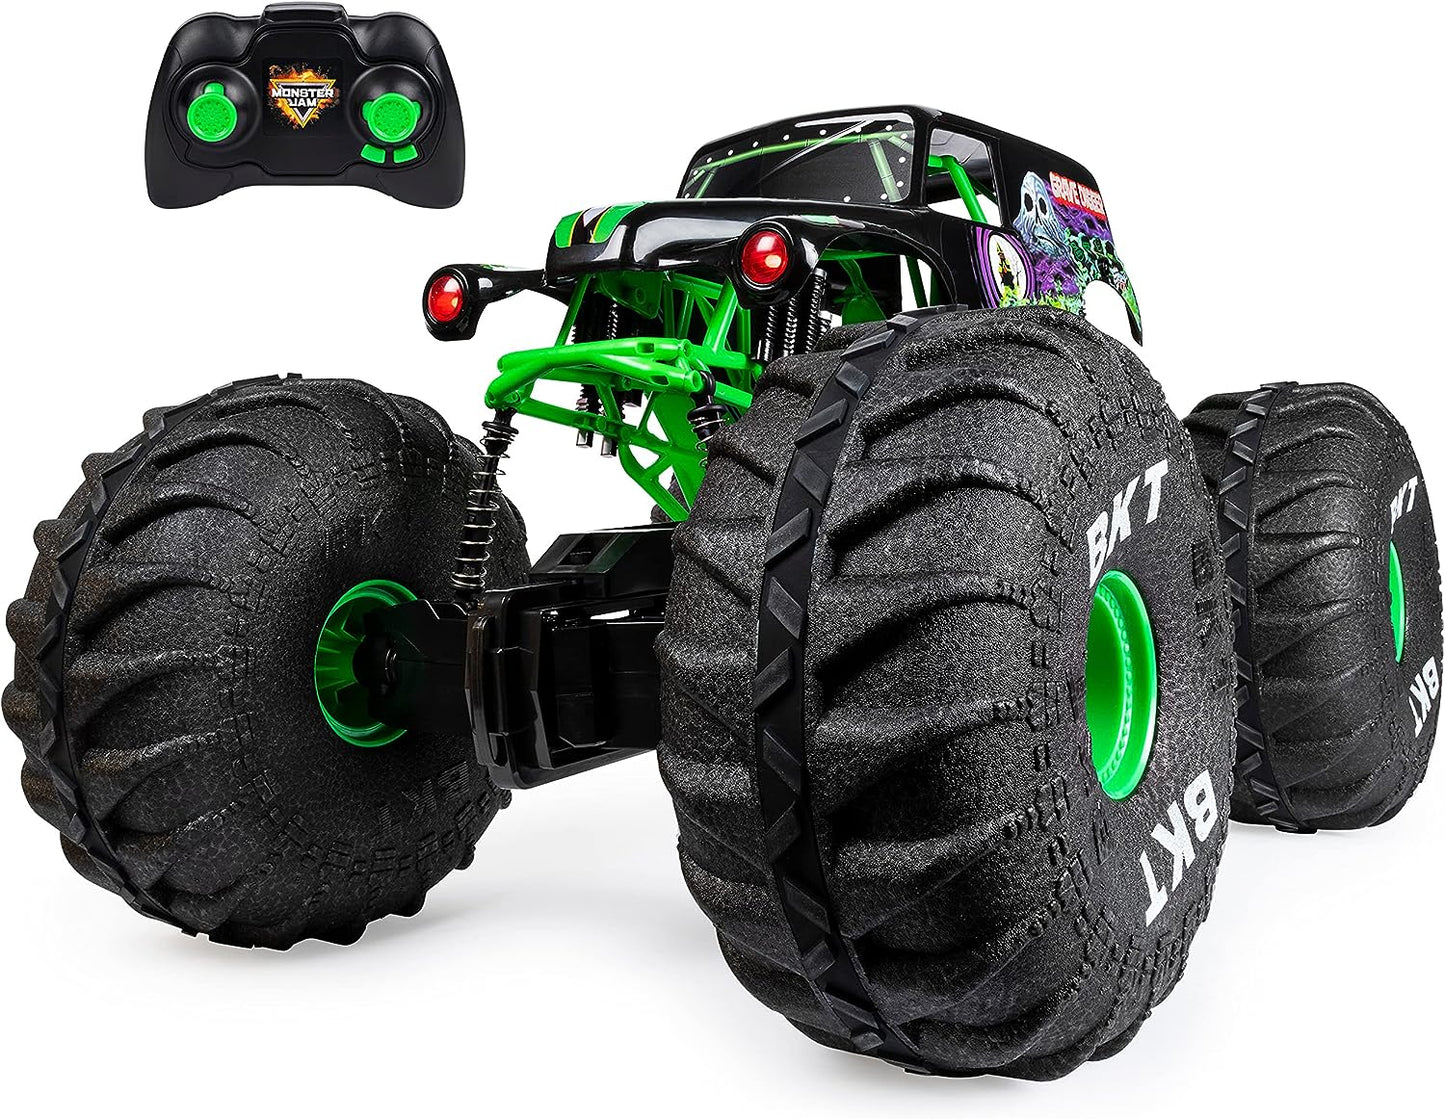 All-Terrain Remote Control Monster Truck - RC Monster Truck - RC vehicle